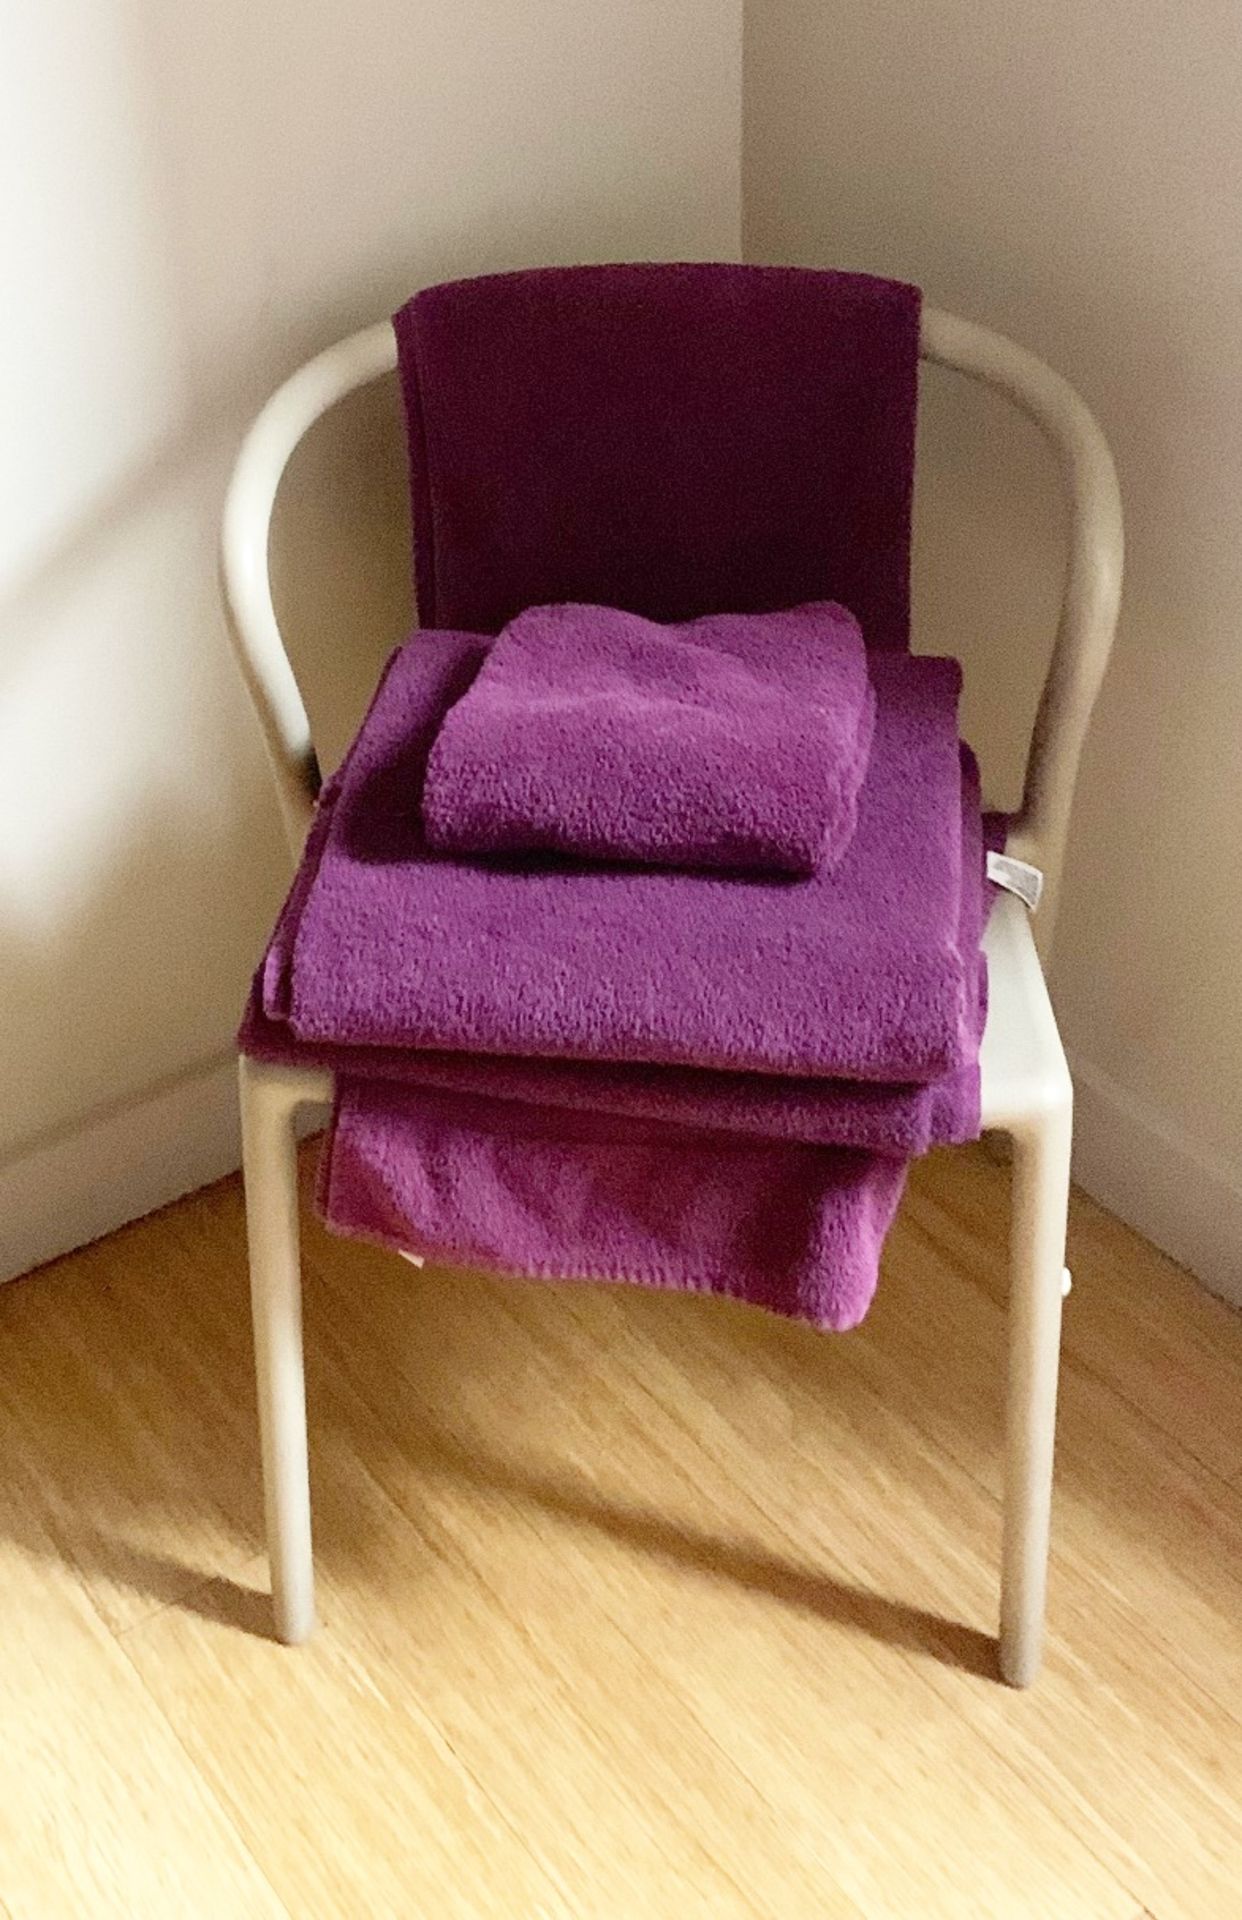 20 x Majestic Luxury 620gsm Bath Towels in Purple - Size MEDIUM - RRP £190 - CL587 - Location: - Image 3 of 4